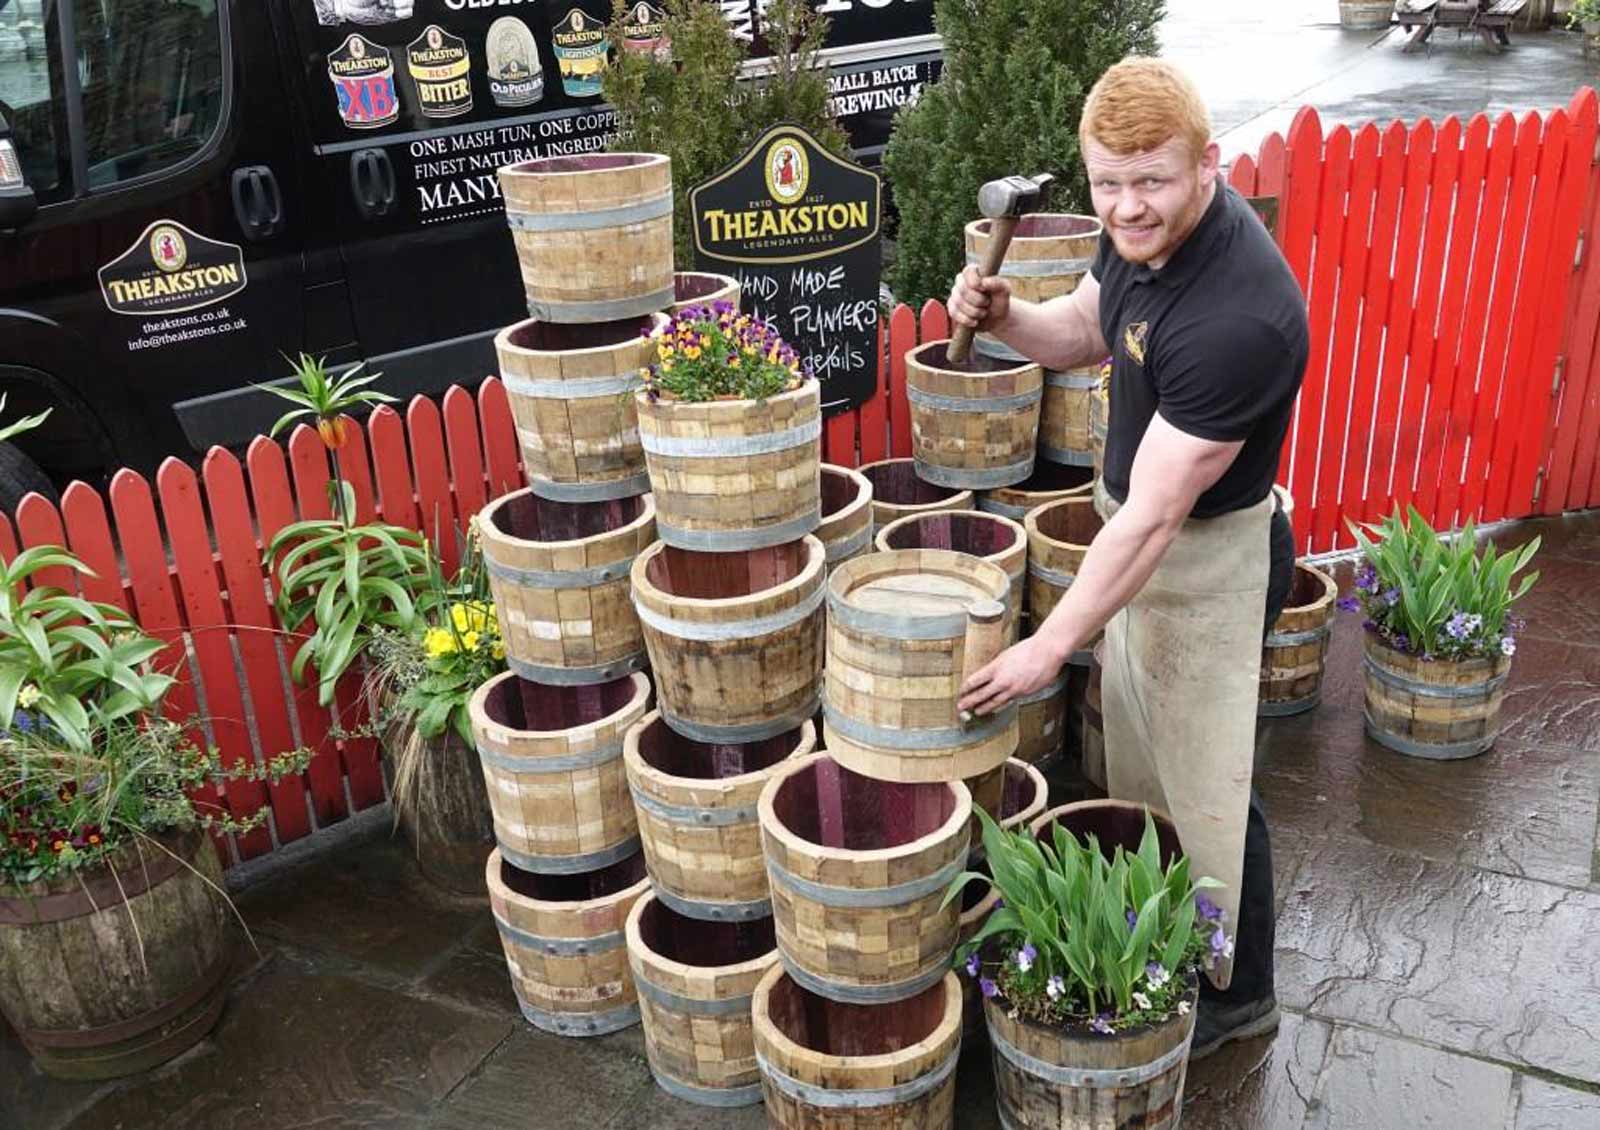 A Must Have For Beer & Gardening Fanatics! Theakston’s apprentice cooper Euan Findlay with the garden planters he has made from cast off beer casks